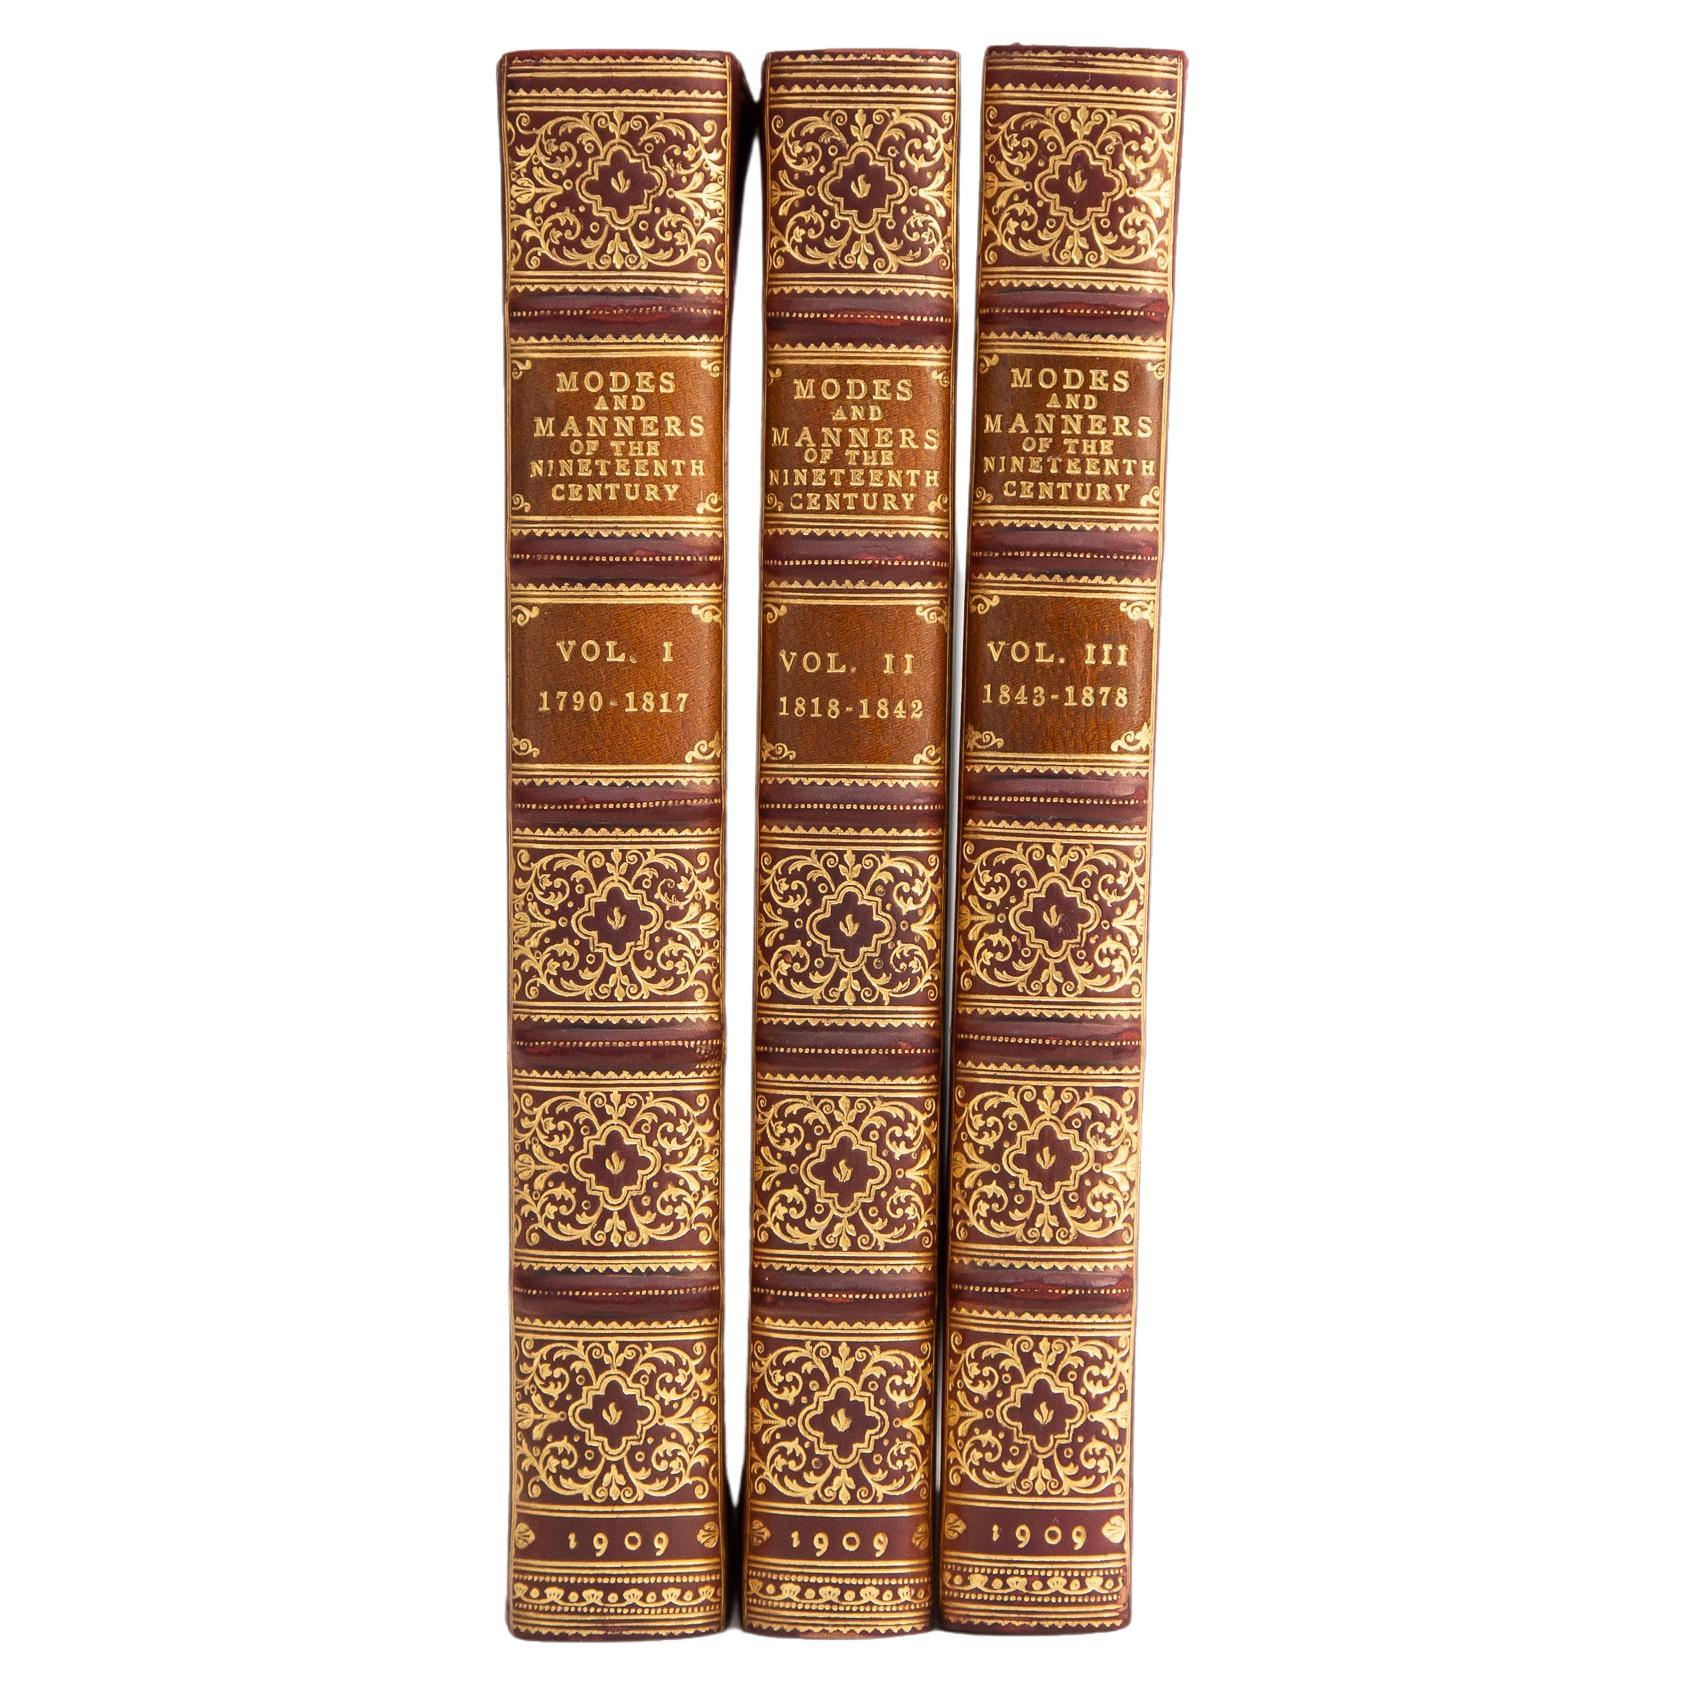 3 Volumes. Dr. Oskar Fischel & Max Boehn, Modes and Manners of the 19th Century For Sale